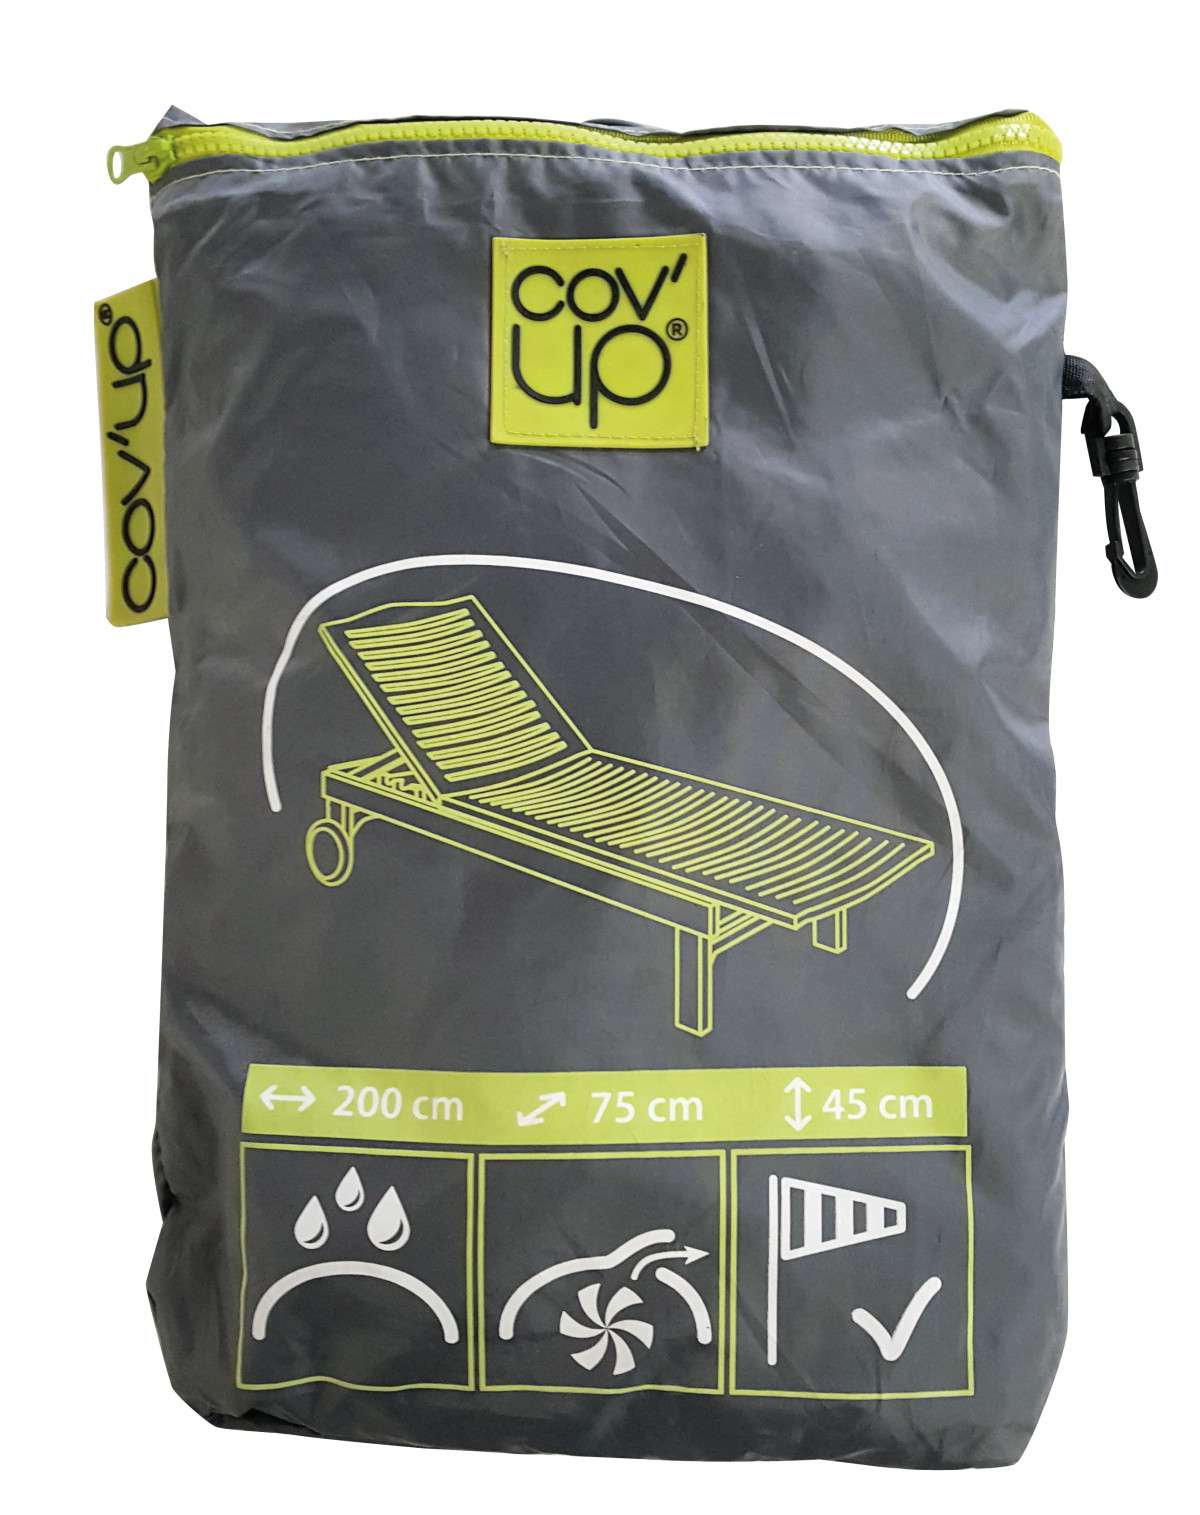 Cot cover - Greenwood